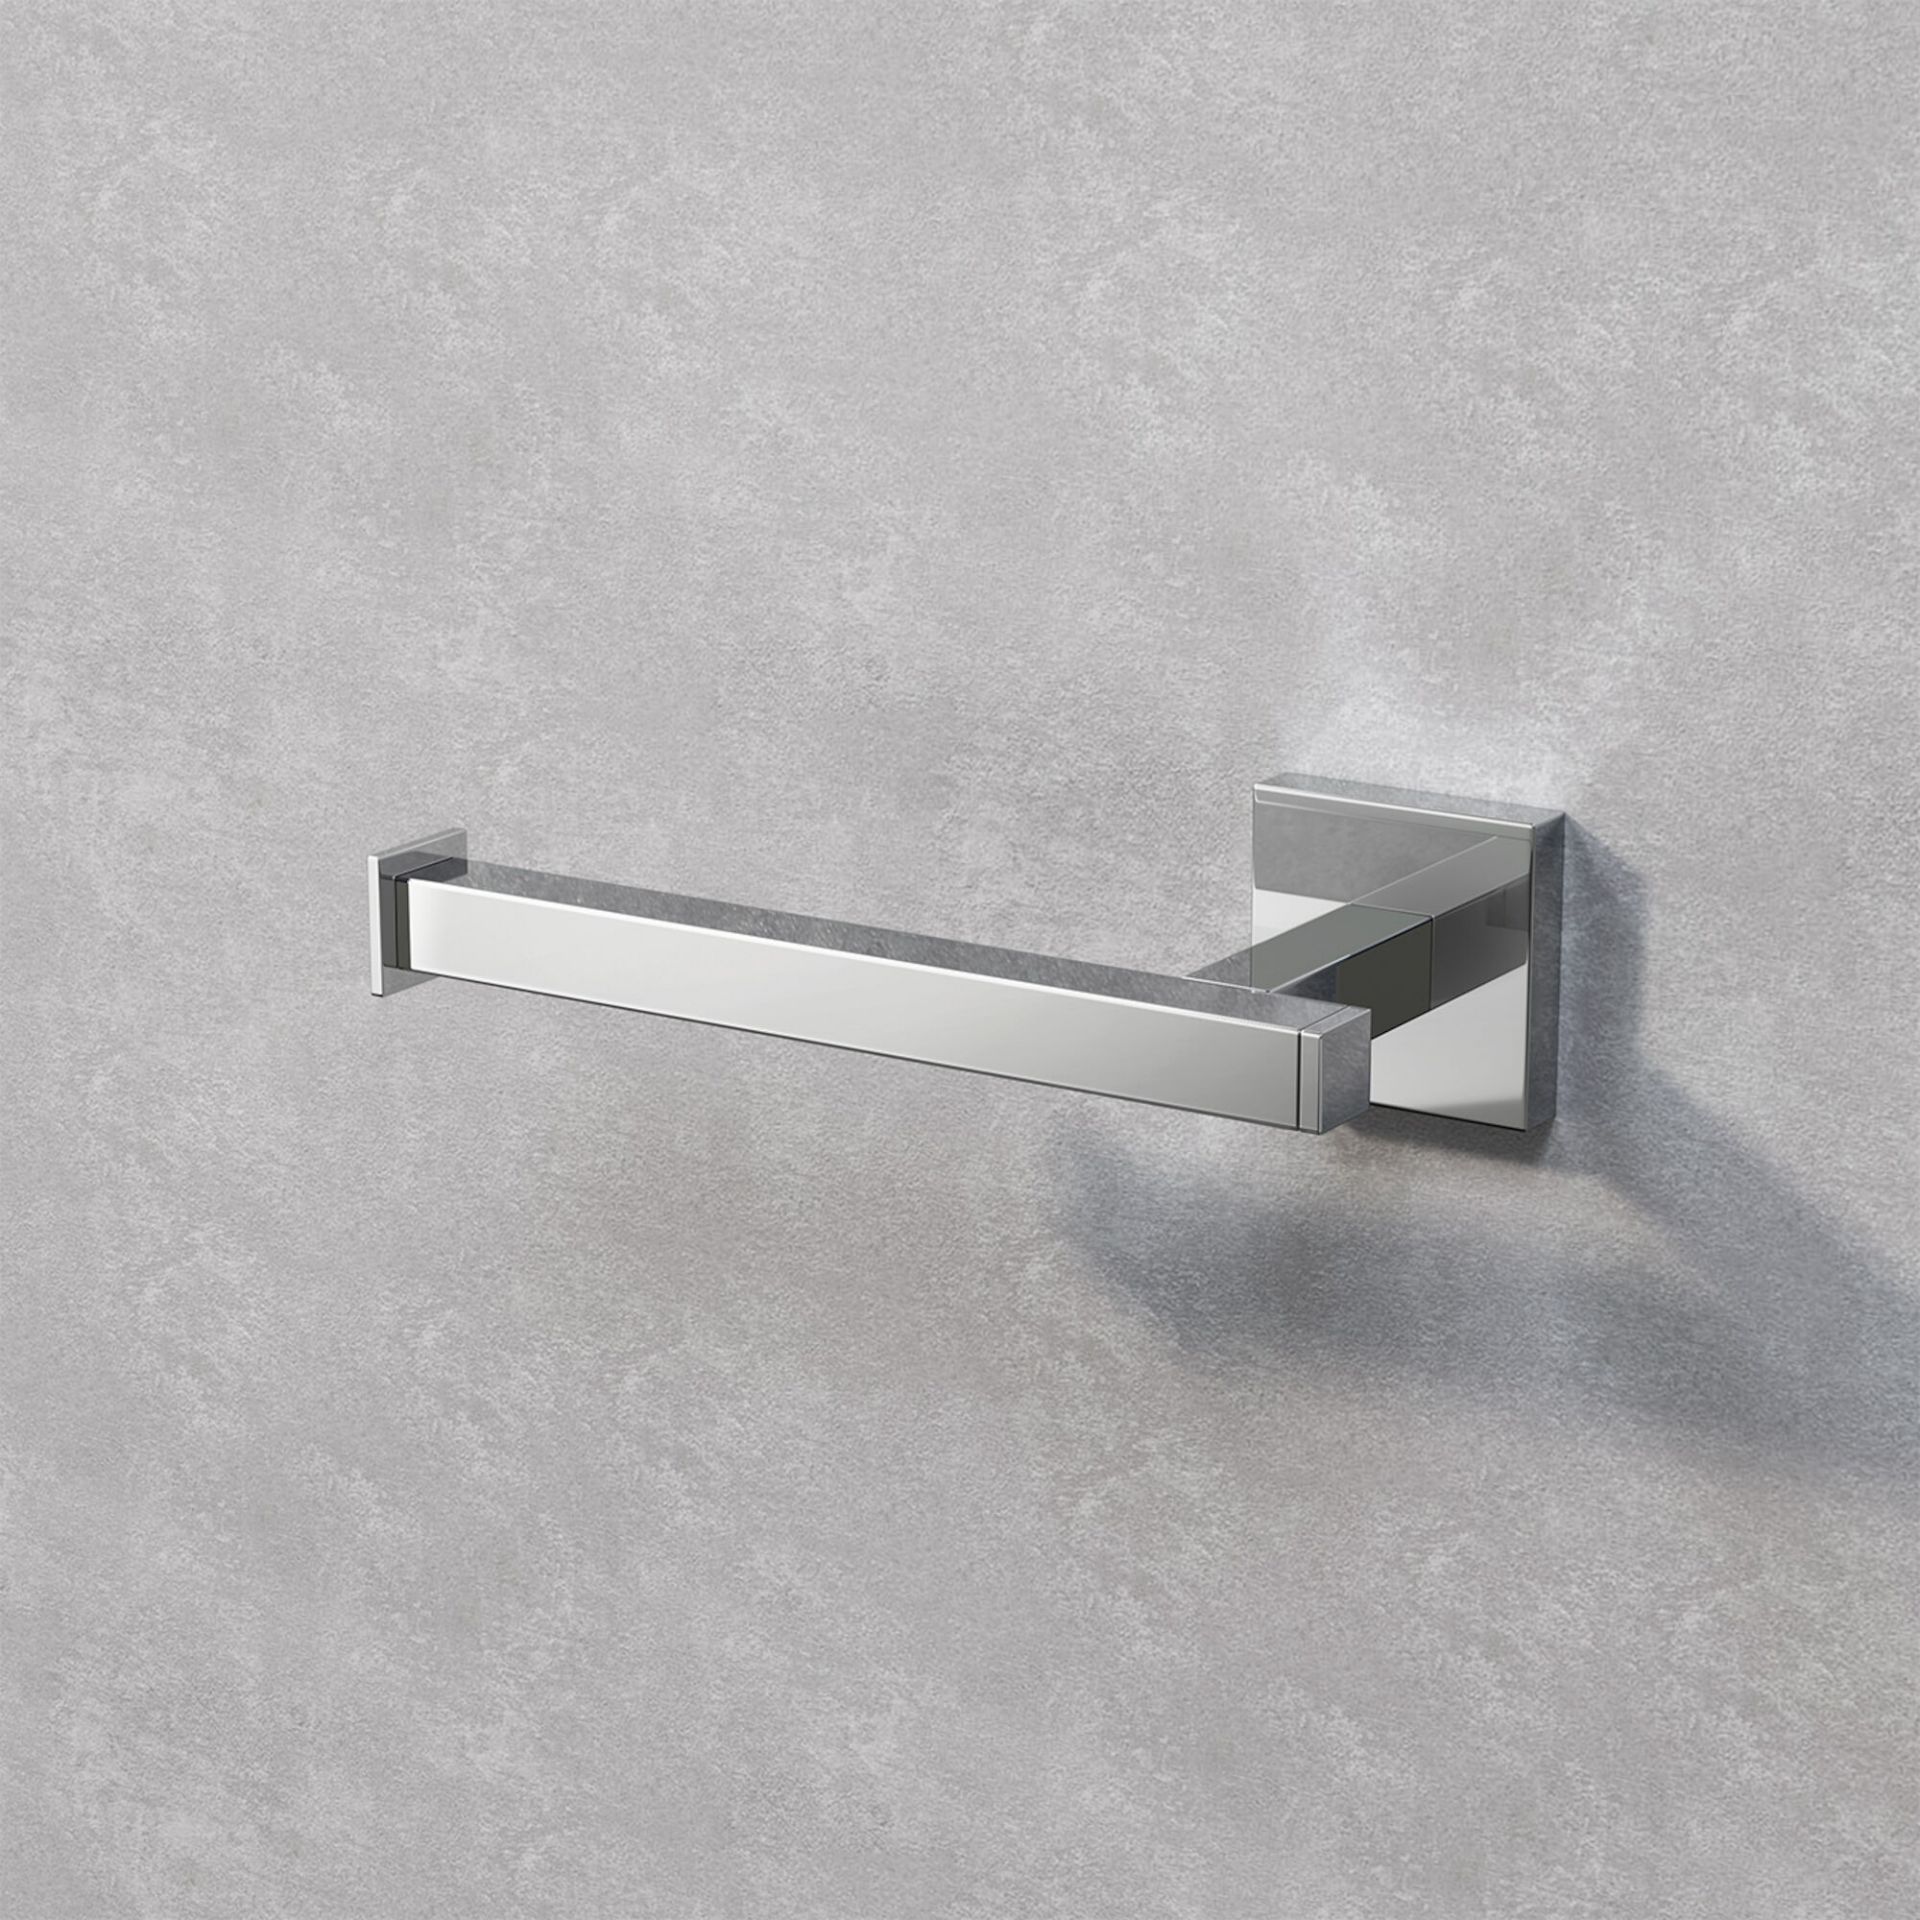 (FF1002) Jesmond Toilet Roll Holder Finishes your bathroom with a little extra functionality a...